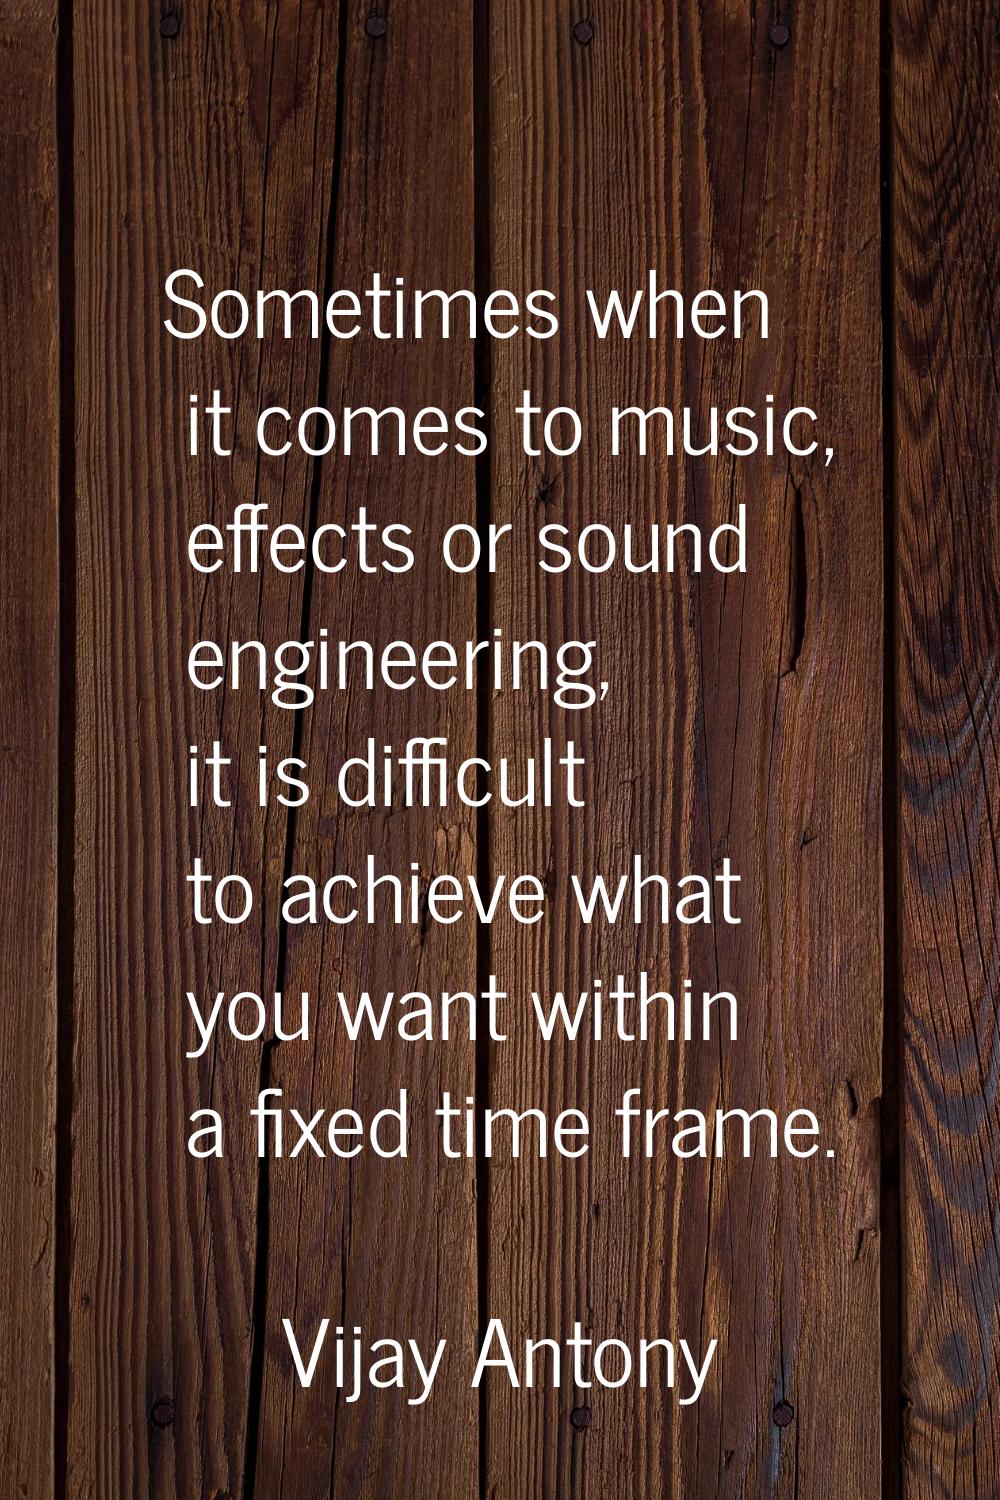 Sometimes when it comes to music, effects or sound engineering, it is difficult to achieve what you